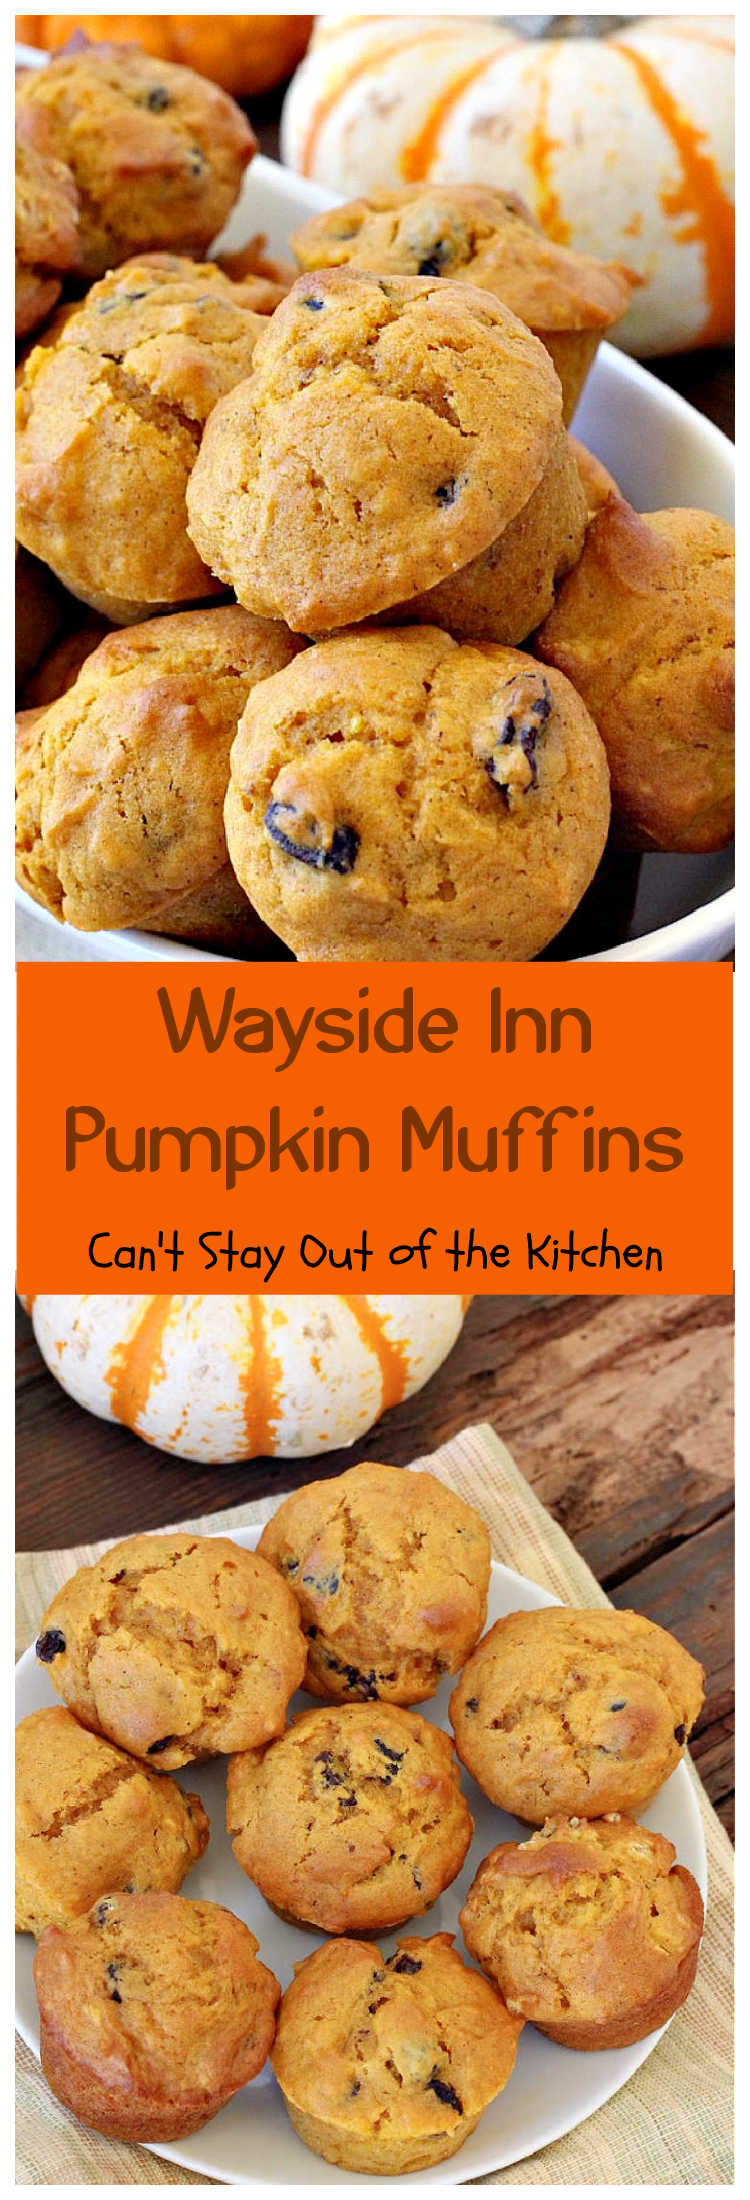 Wayside Inn Pumpkin Muffins | Can't Stay Out of the Kitchen | these fabulous #muffins are served at the historic #LongellowsWaysideInn in Sudbury, Massachusetts. They are absolutely divine! Great for a #holiday #breakfast like #Thanksgiving or #Christmas #pumpkin #raisins #PumpkinMuffins #WaysideInnPumpkinMuffins